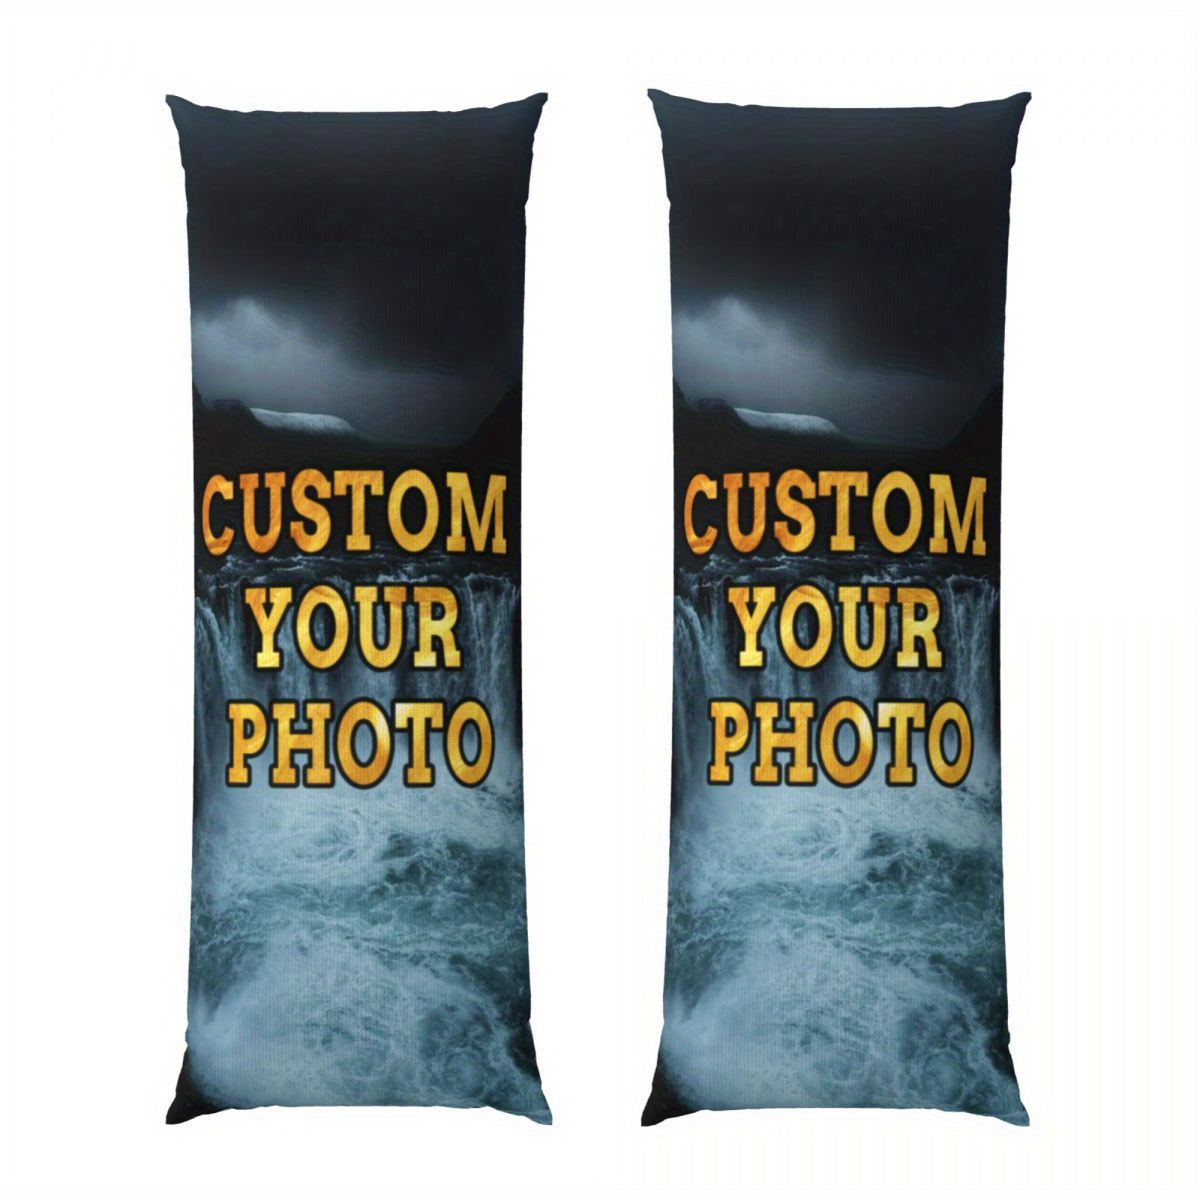 

Custom Photo Pillowcase - Soft Polyester Plush, Double-sided Print, 20x54 Inches - Perfect For Sofa & Bedroom Decor, Machine Washable, Zip Closure